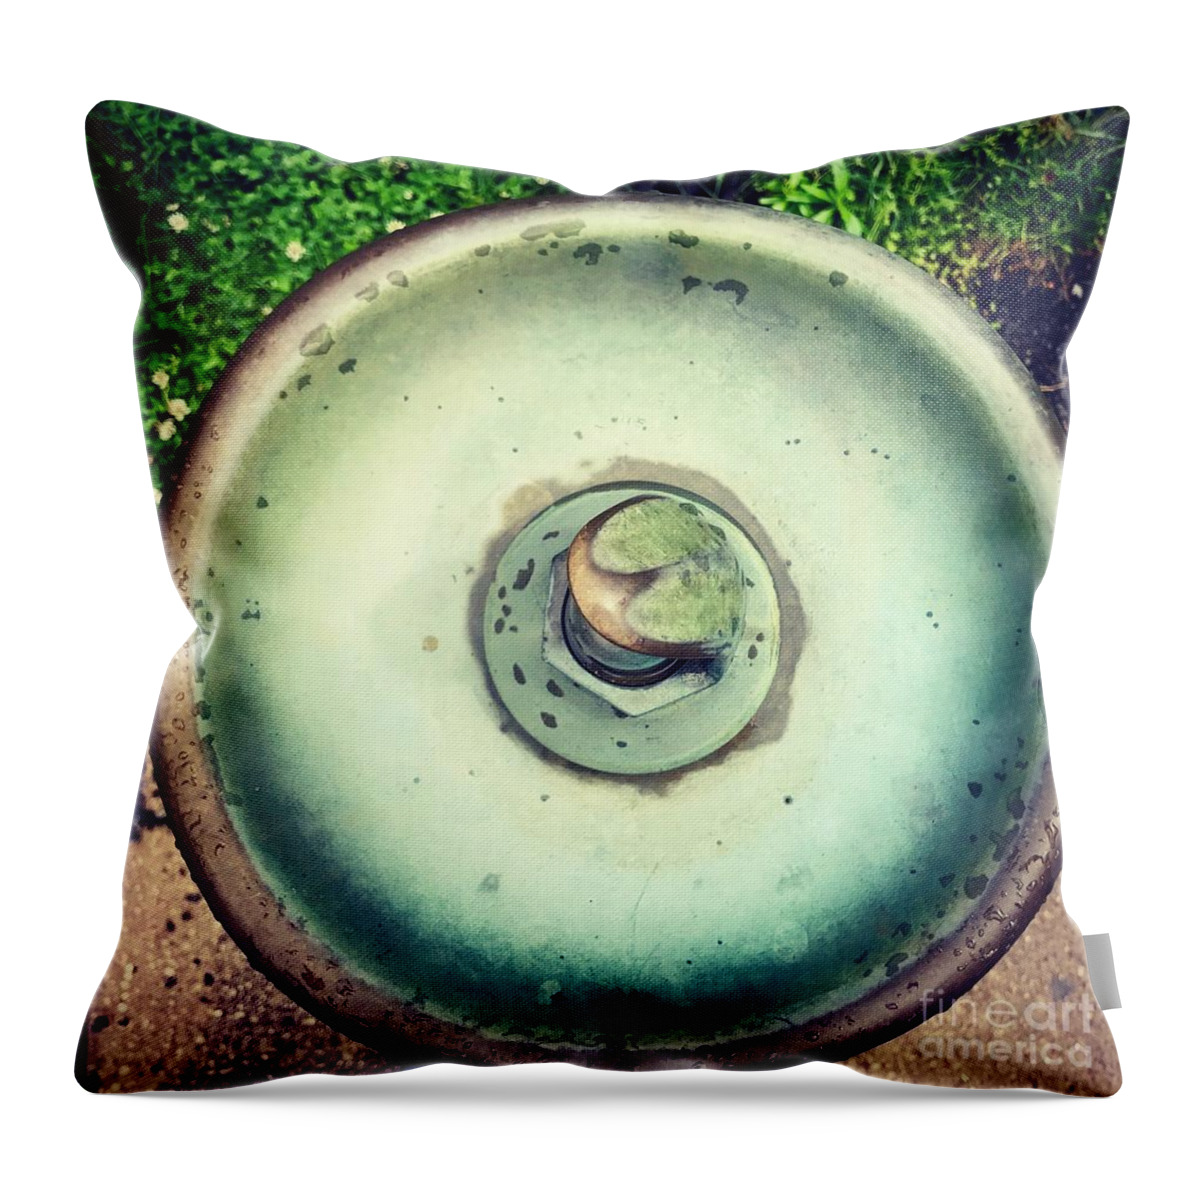 Fountain Throw Pillow featuring the photograph Founta Circle by Suzanne Lorenz